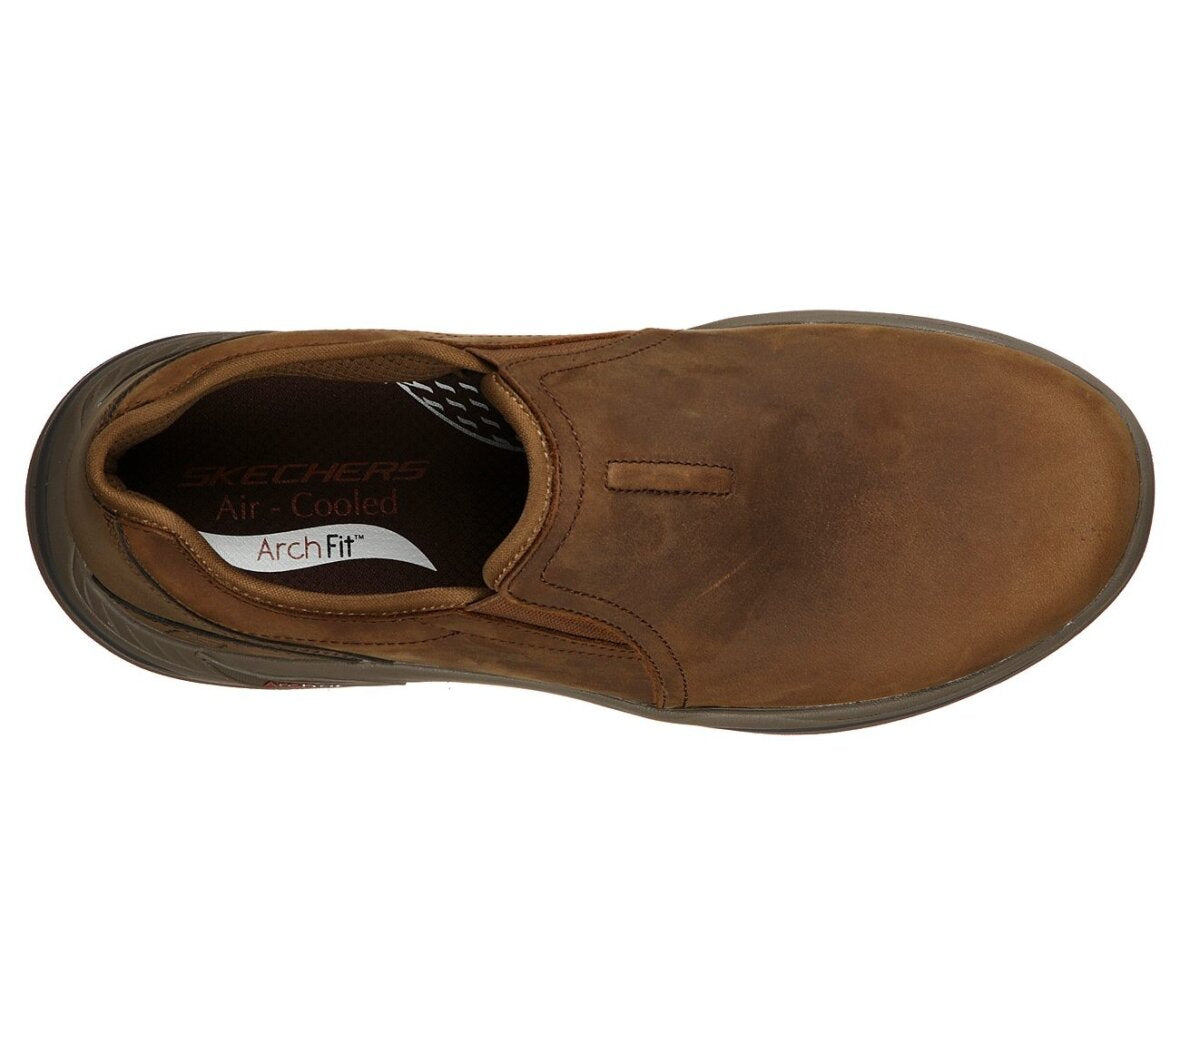 Arch Fit Motley Slip On Shoe